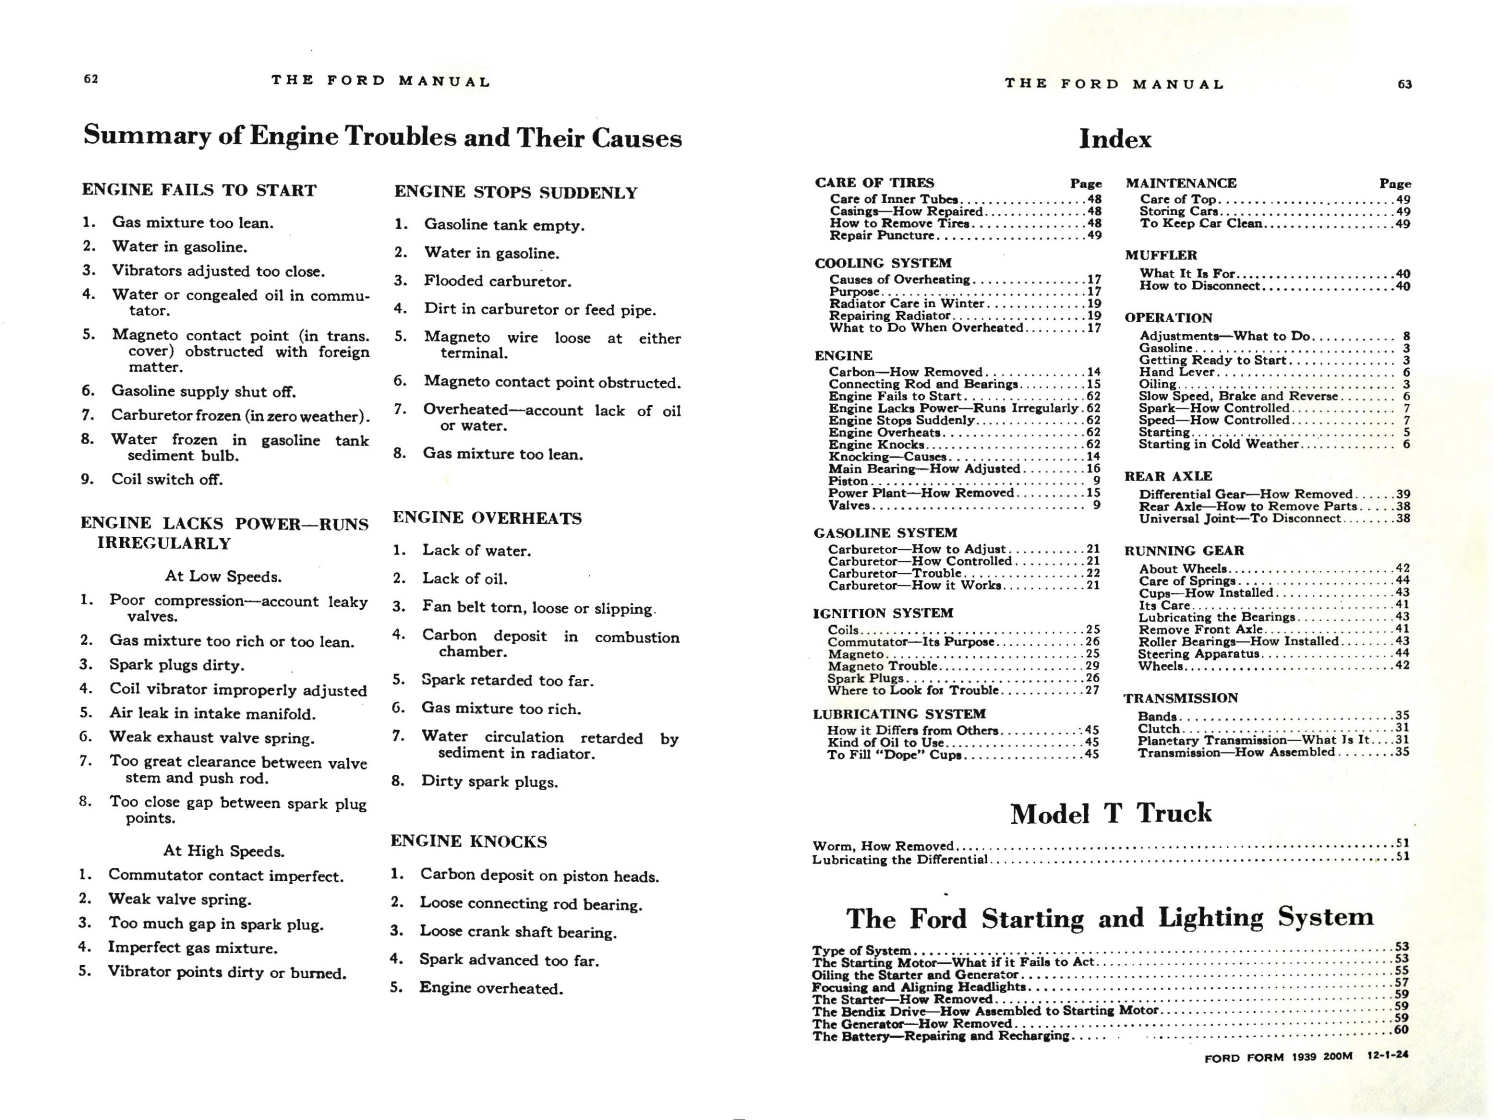 1924_Ford_Owners_Manual-62-63